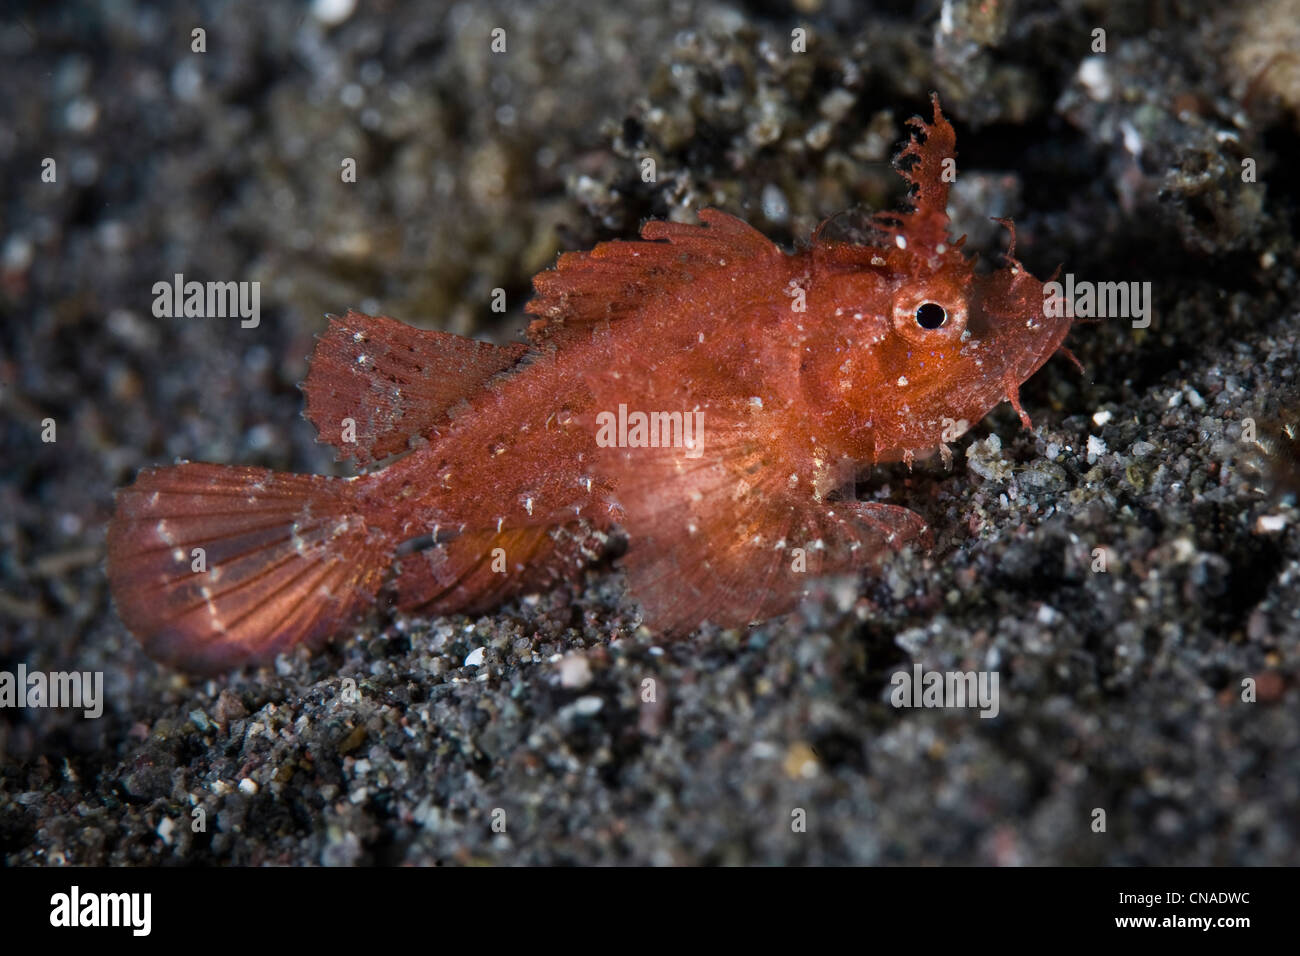 A juvenile Ambon scorpionfish, Pteroidichthys amboinensis, uses its texture and color to blend into the marine environment. Stock Photo